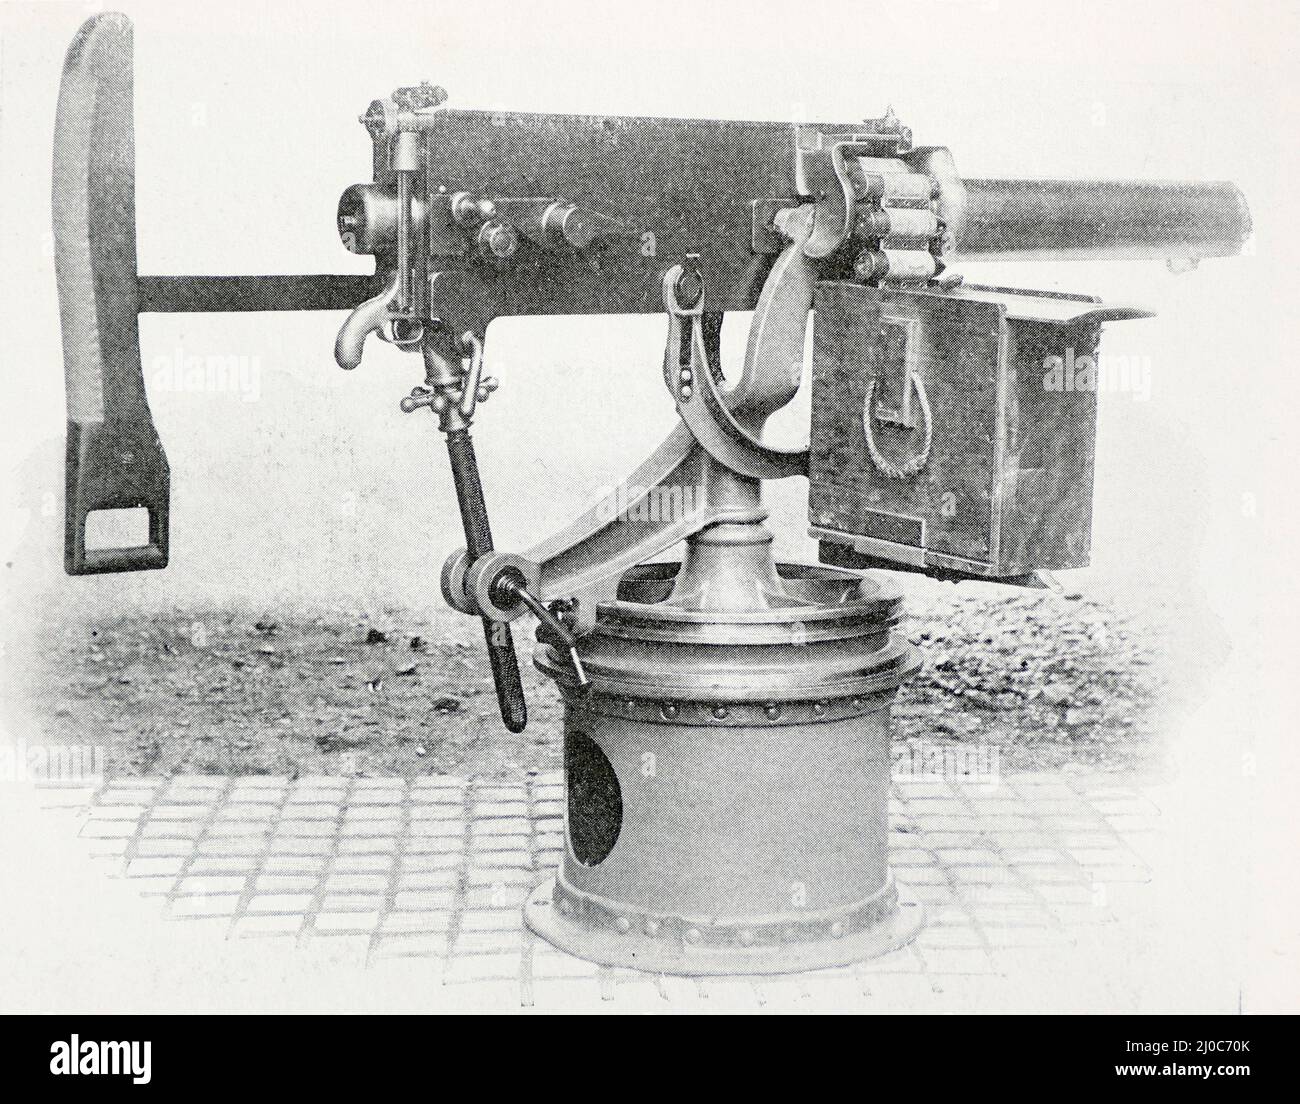 A large Maxim gun, as used in the French and Russian Navies' Black and white photograph Stock Photo